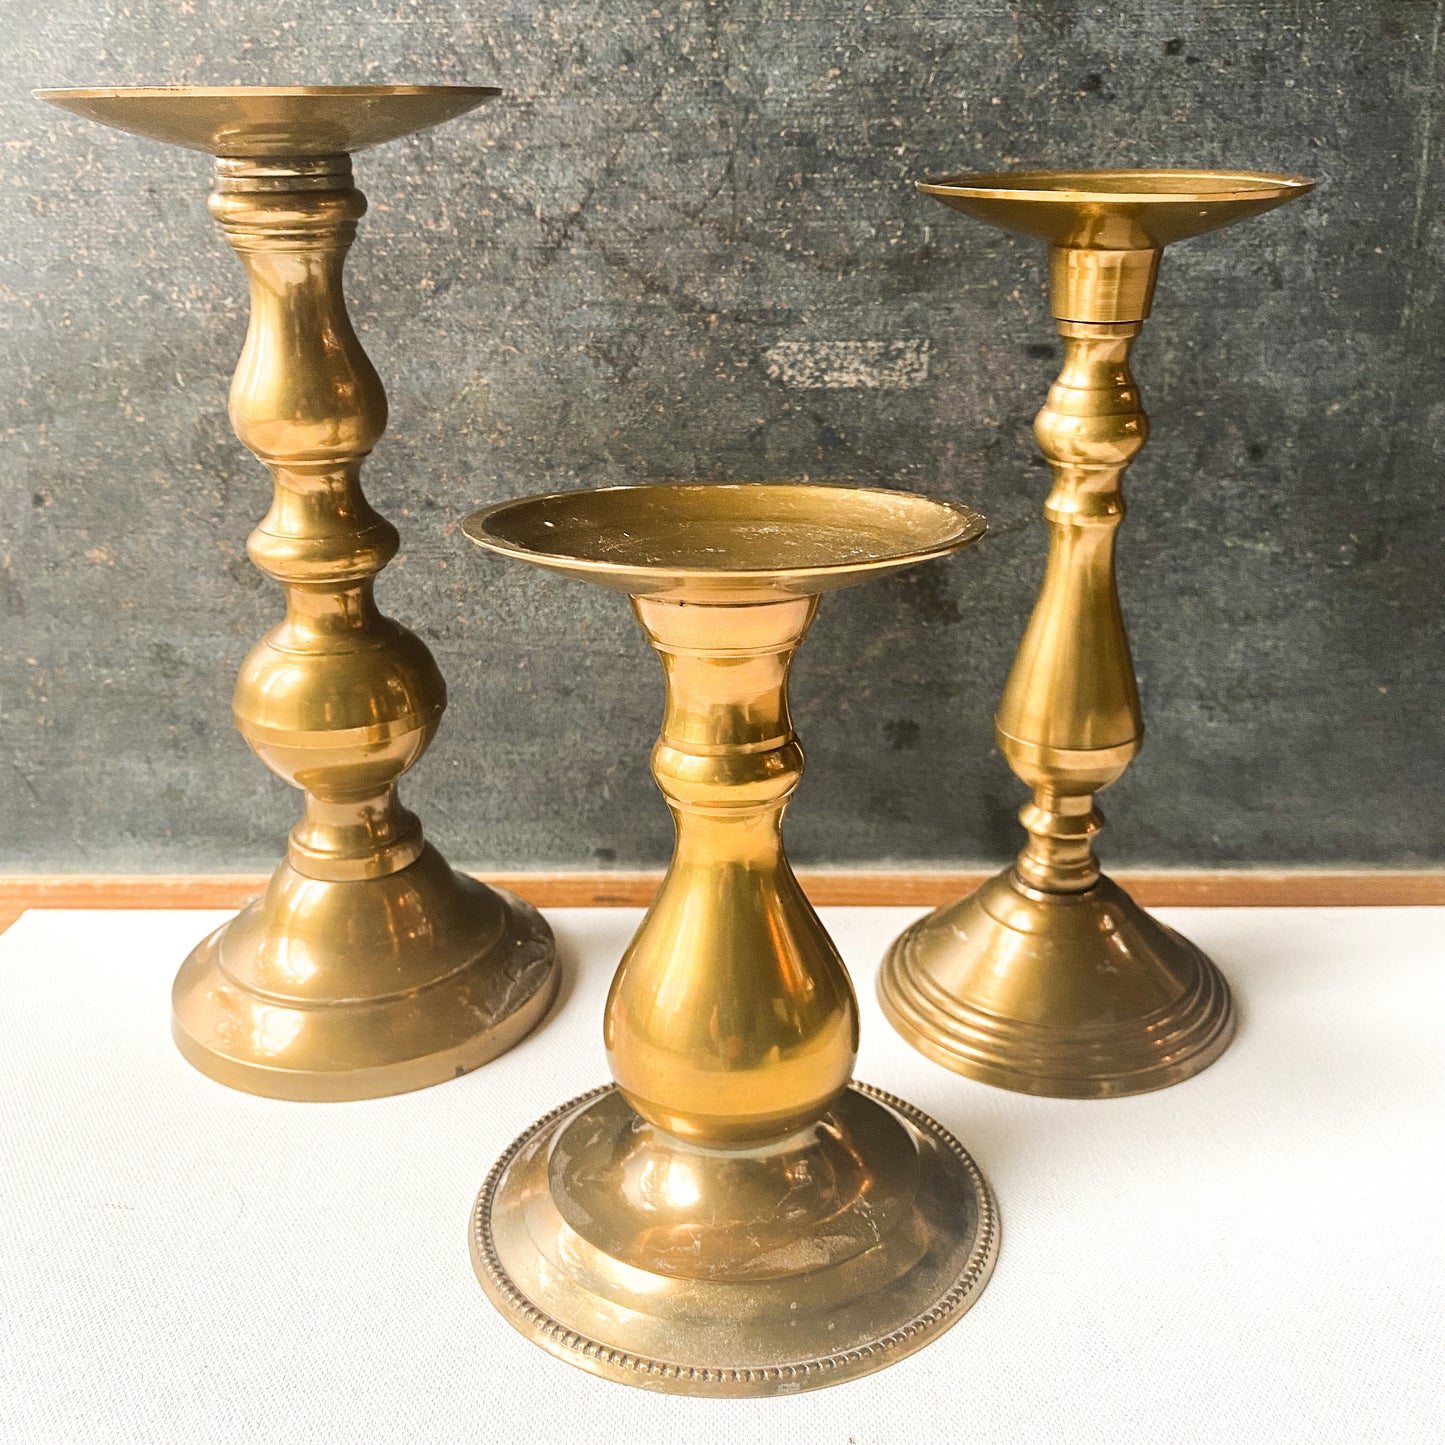 Vintage Brass Candle Holders, Taper or Pillar Candle Trio